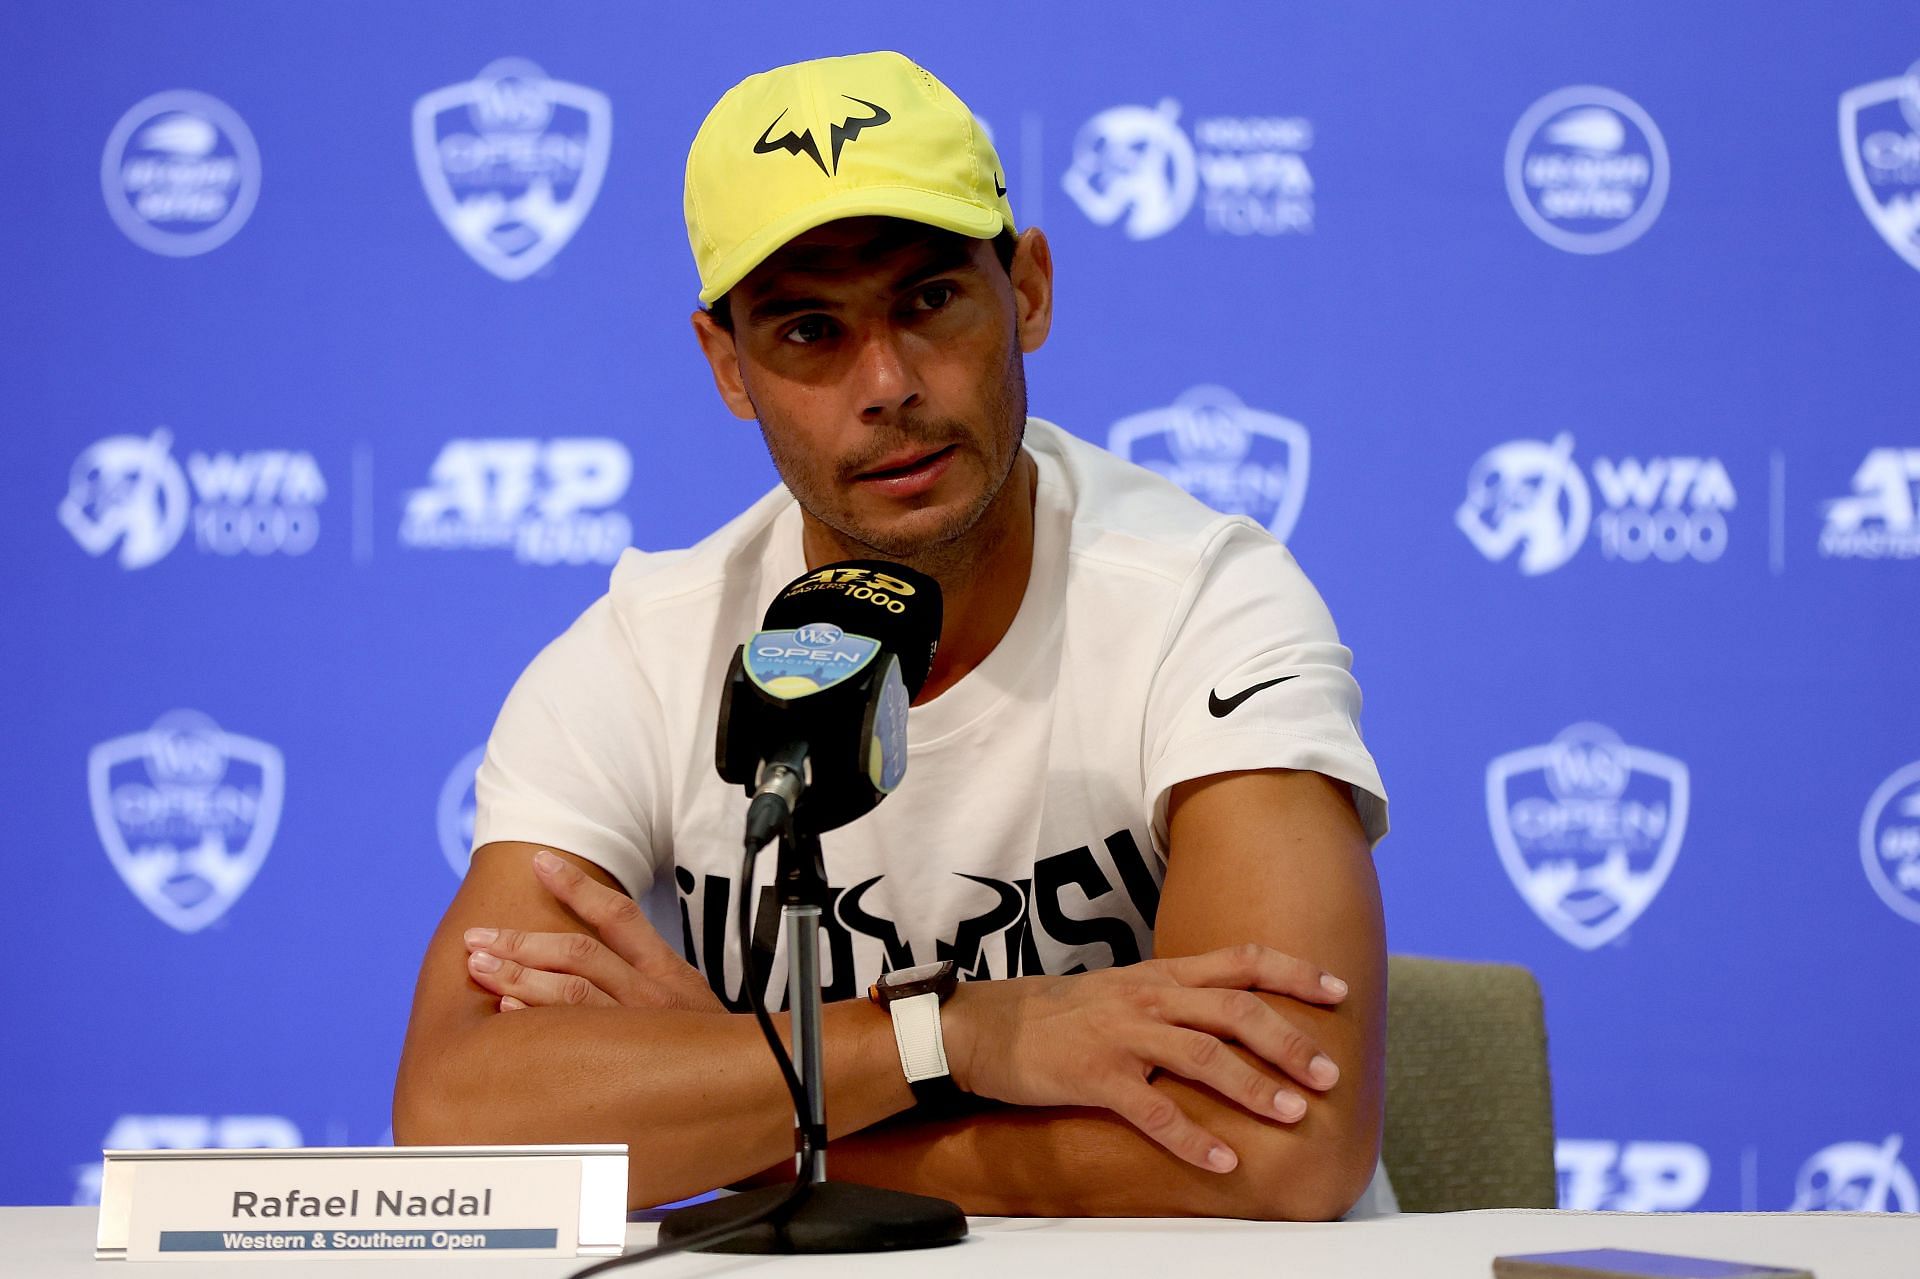 Nadal will compete at the US Open as the second seed